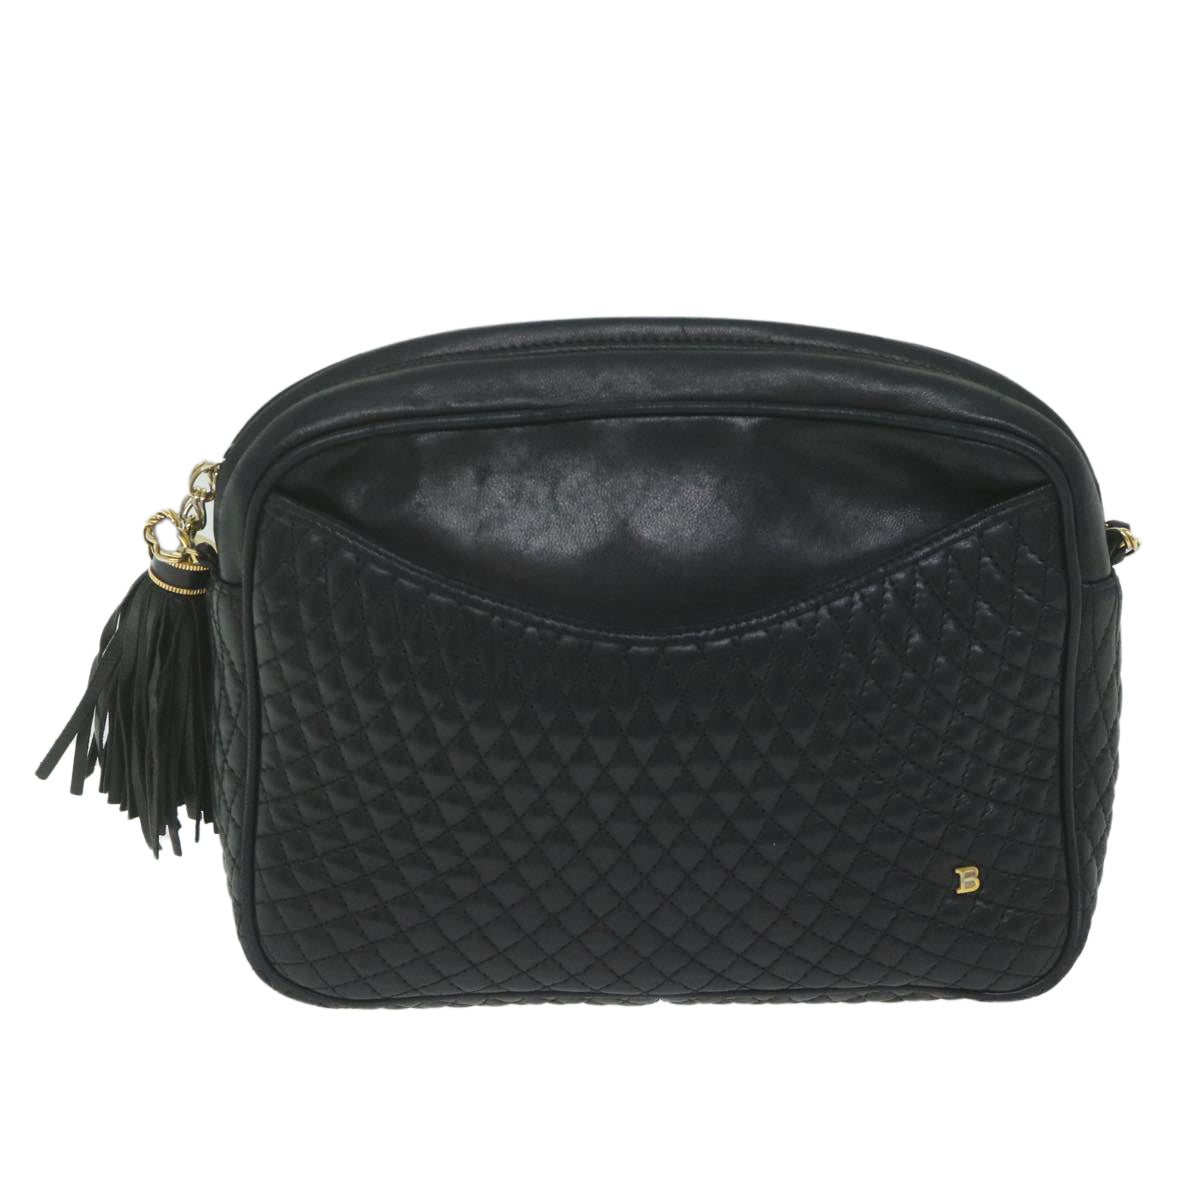 BALLY Quilted Chain Shoulder Bag Leather Black Auth fm2991 - 0